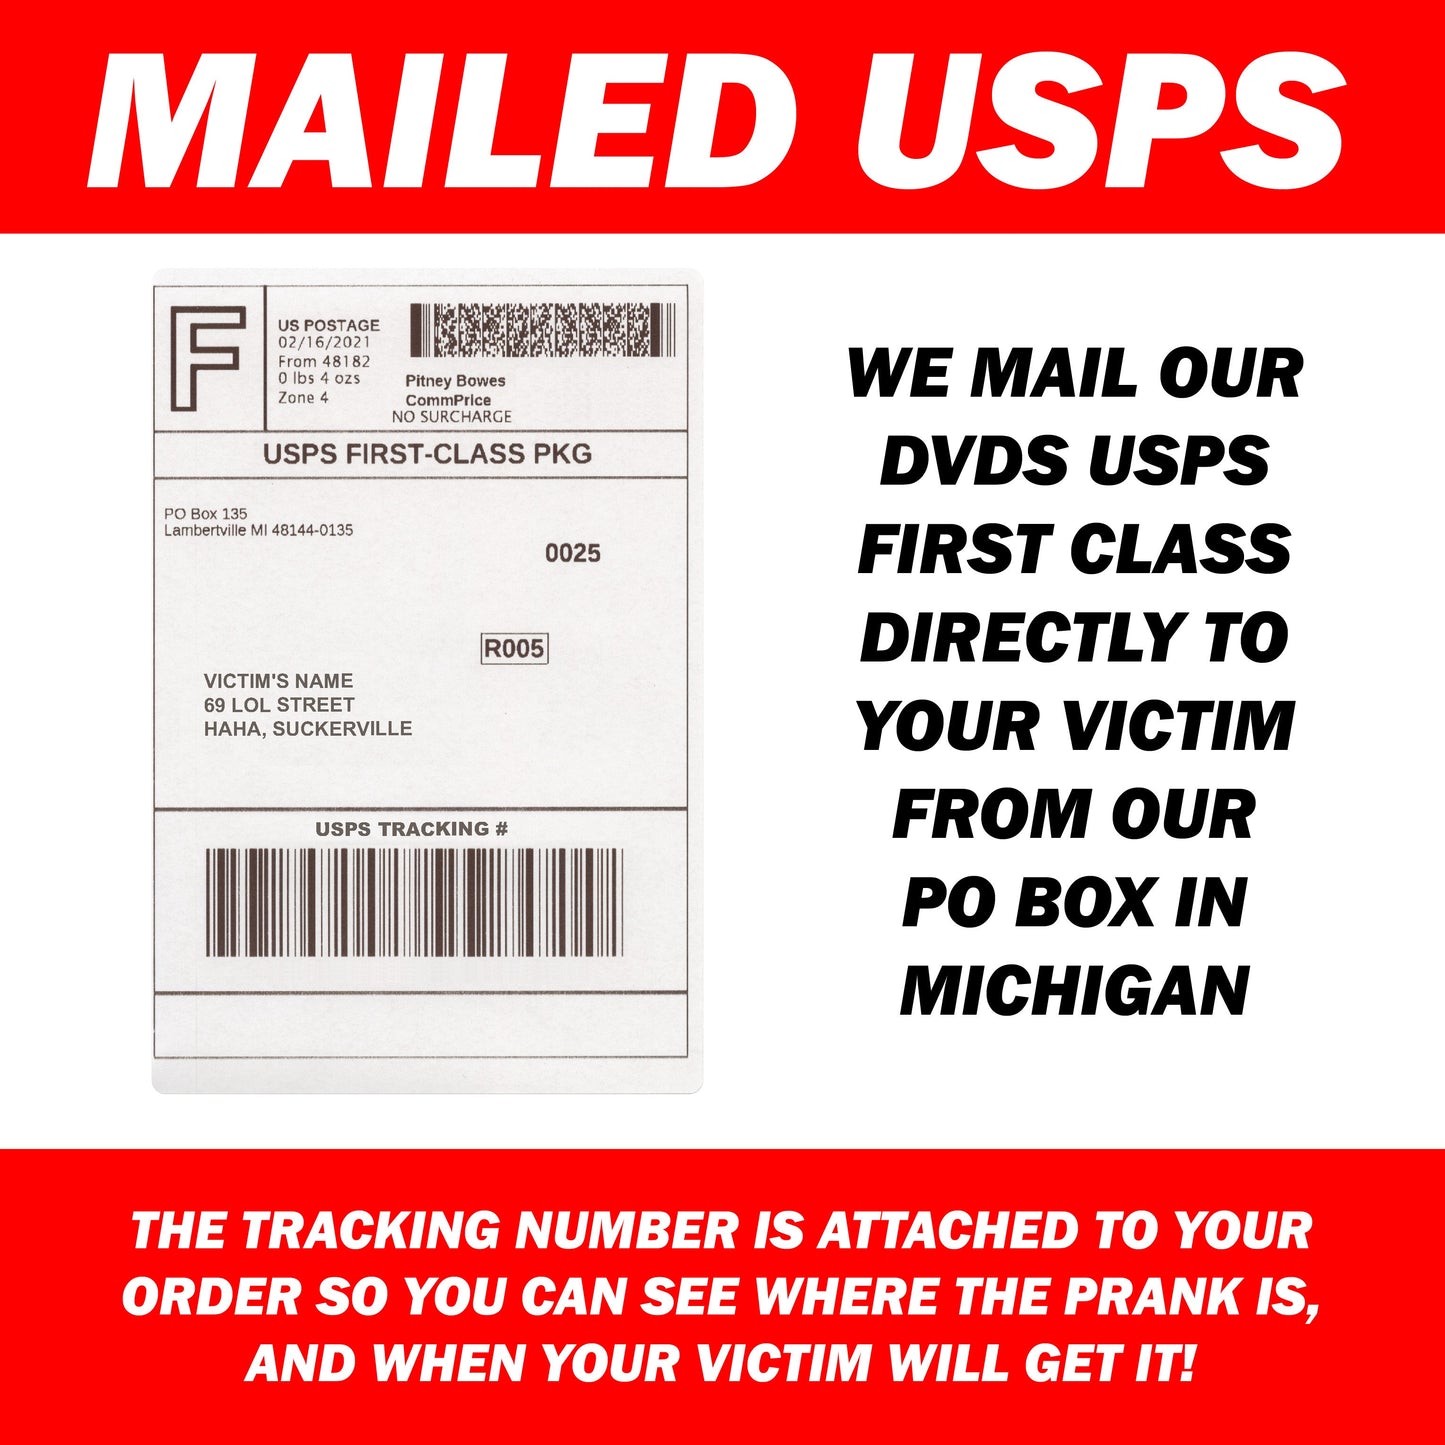 Moobs Man Boobs Fake DVD mail prank gets sent directly to your victims 100% anonymously!